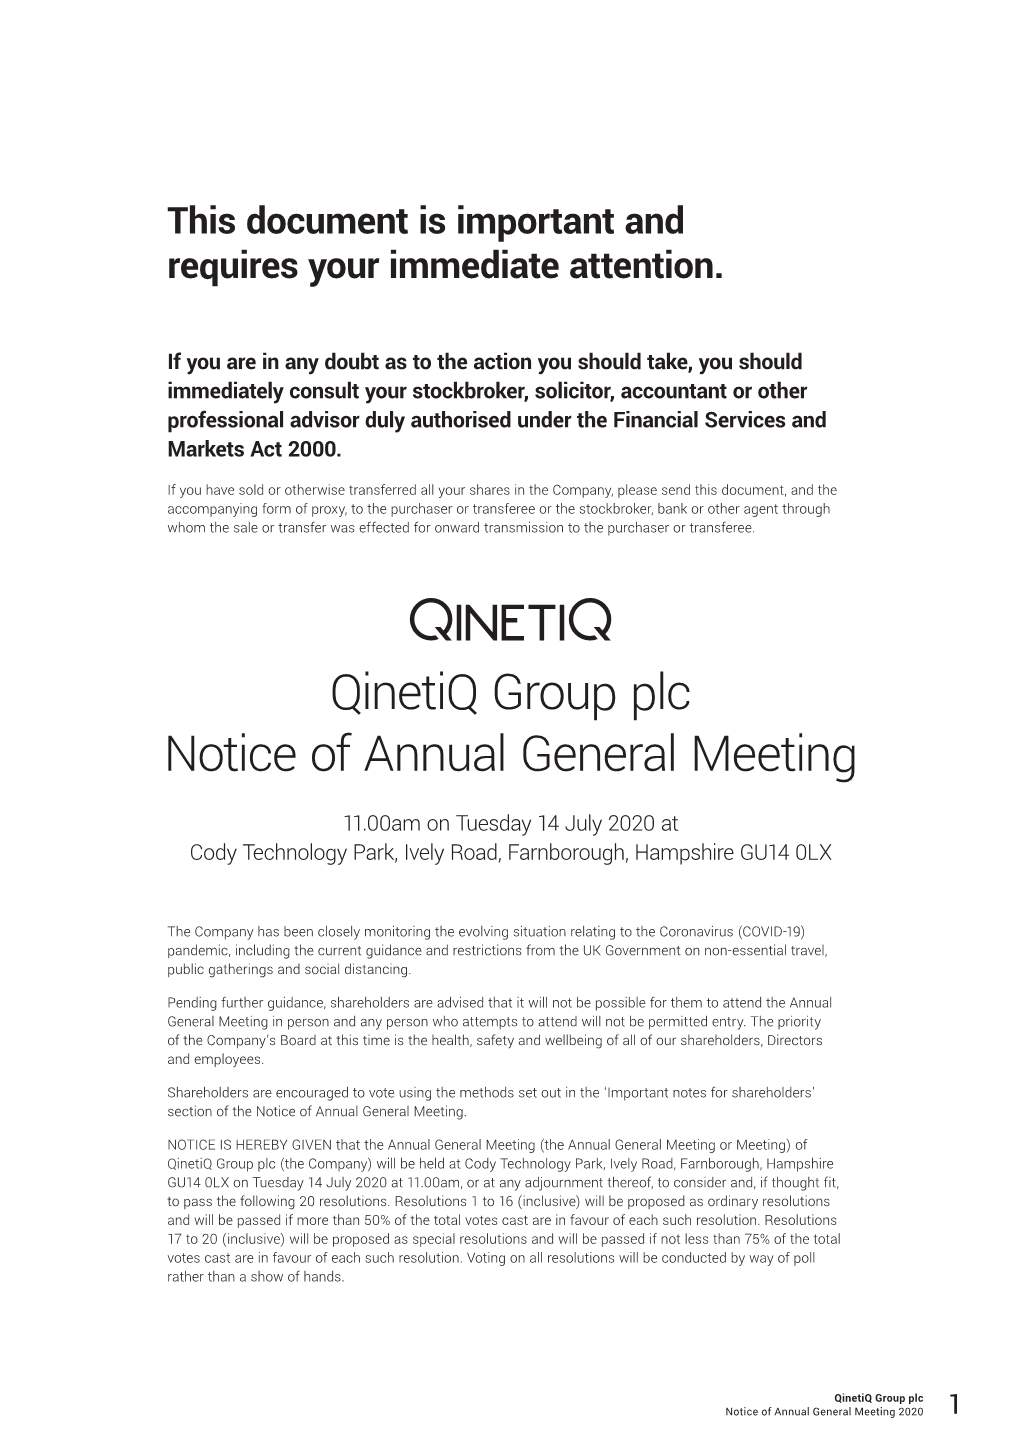 Qinetiq Group Plc Notice of Annual General Meeting